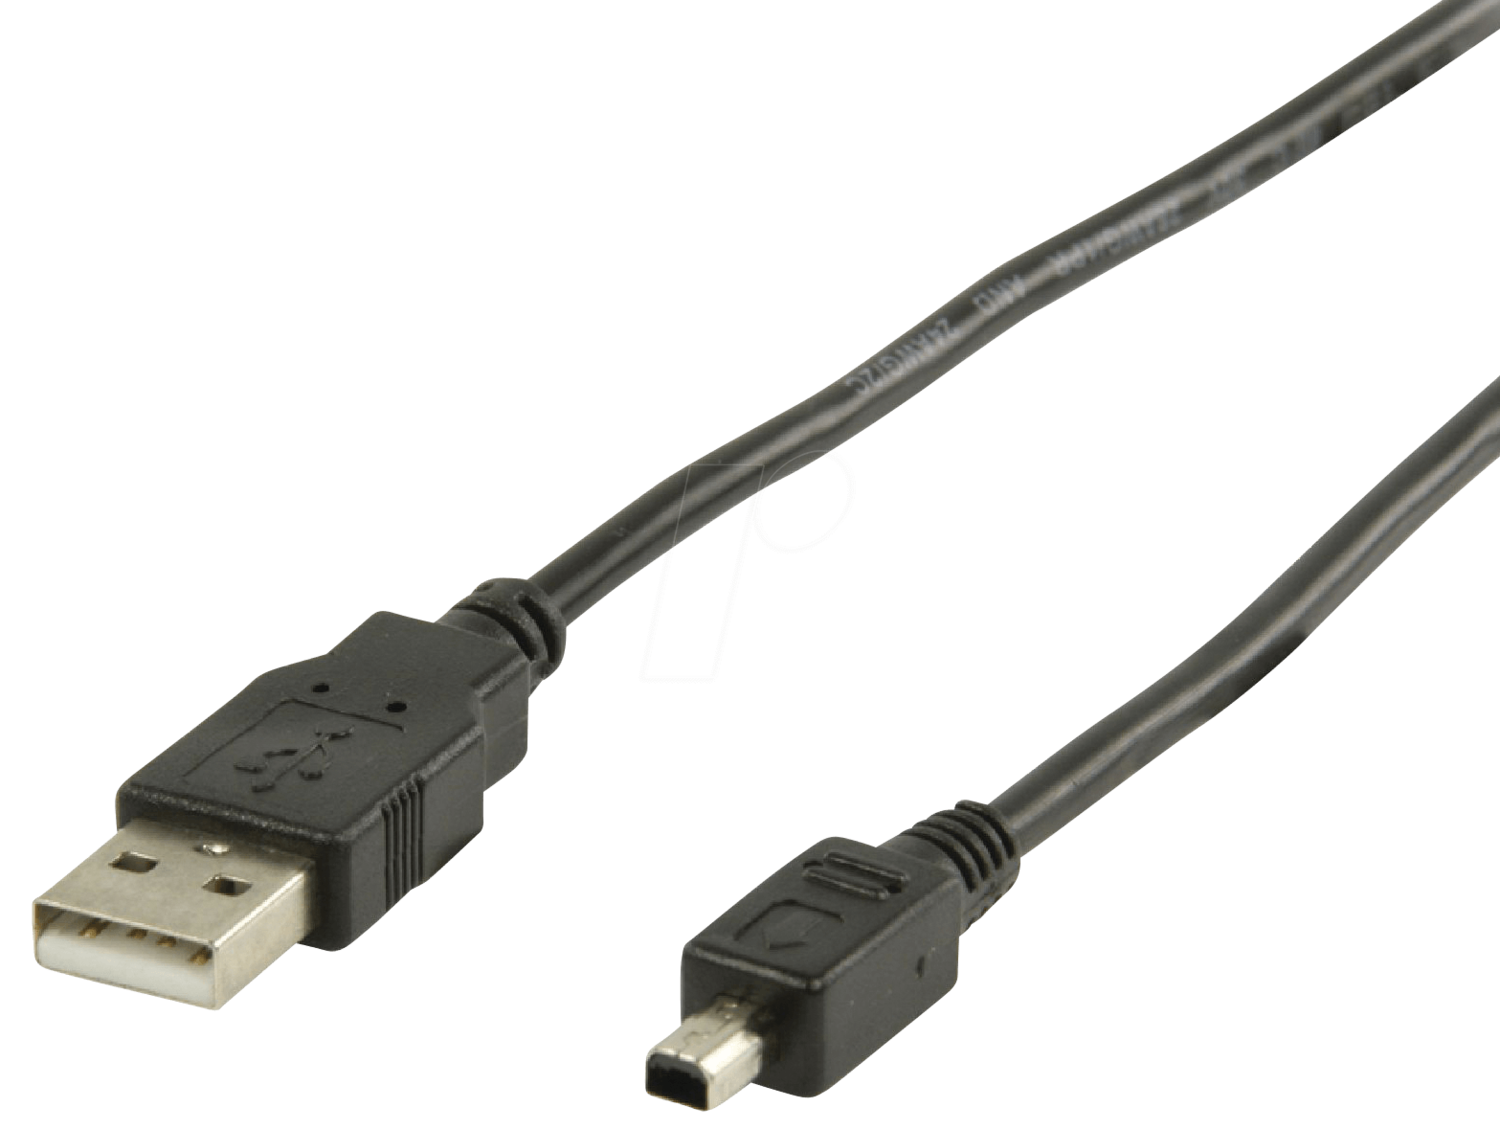 USB 2.0 Mini Cable (Type A To 4pin, Mitsumi, 1.8m)